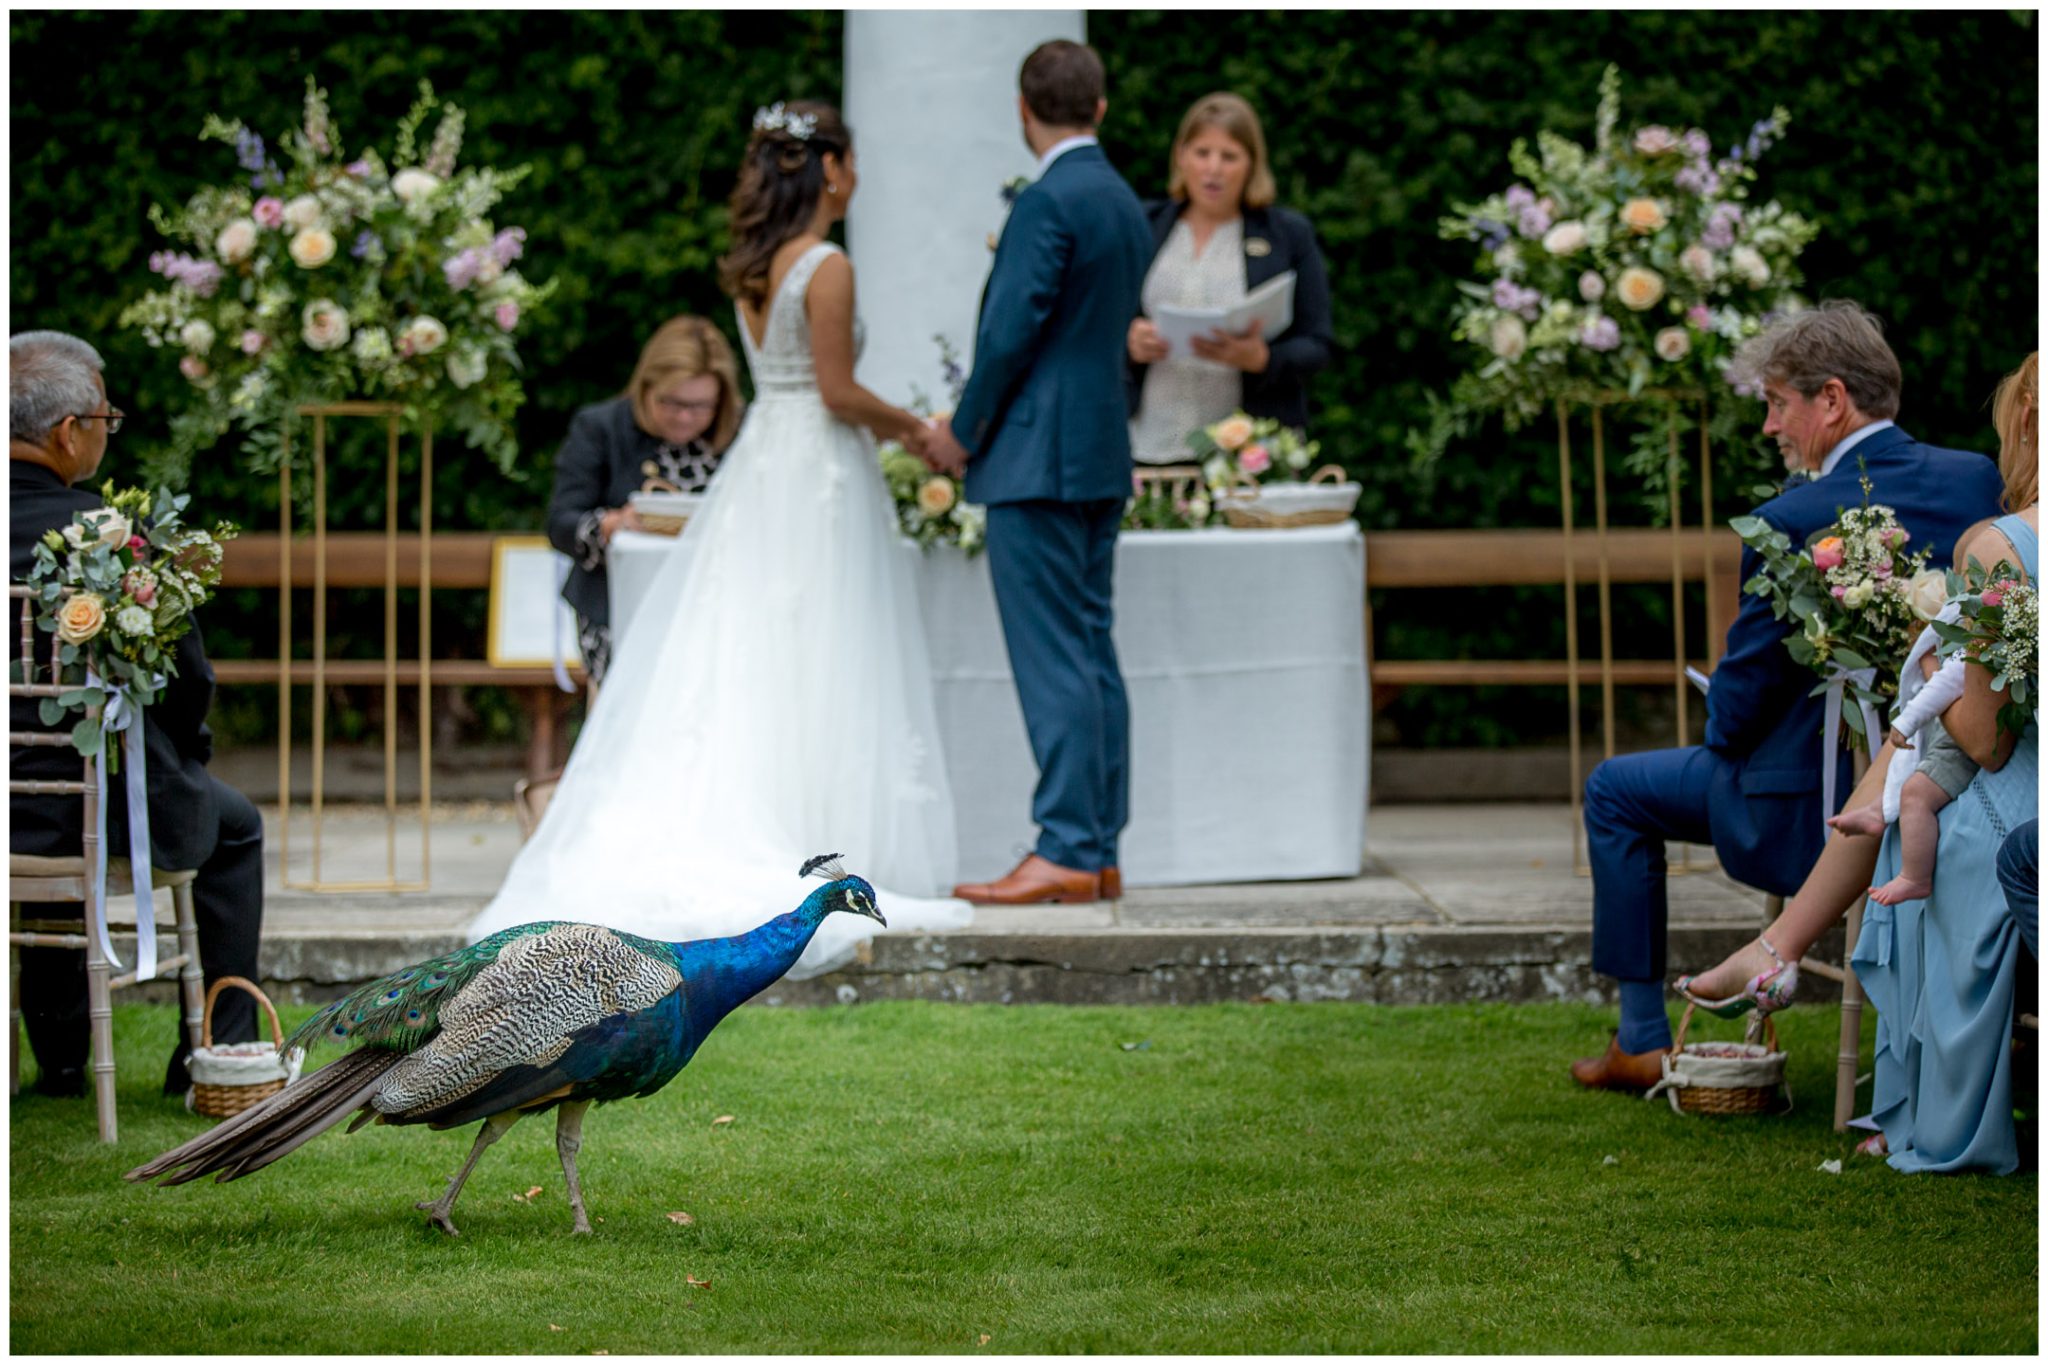 A peacock wanders through the outdoor wedding ceremony